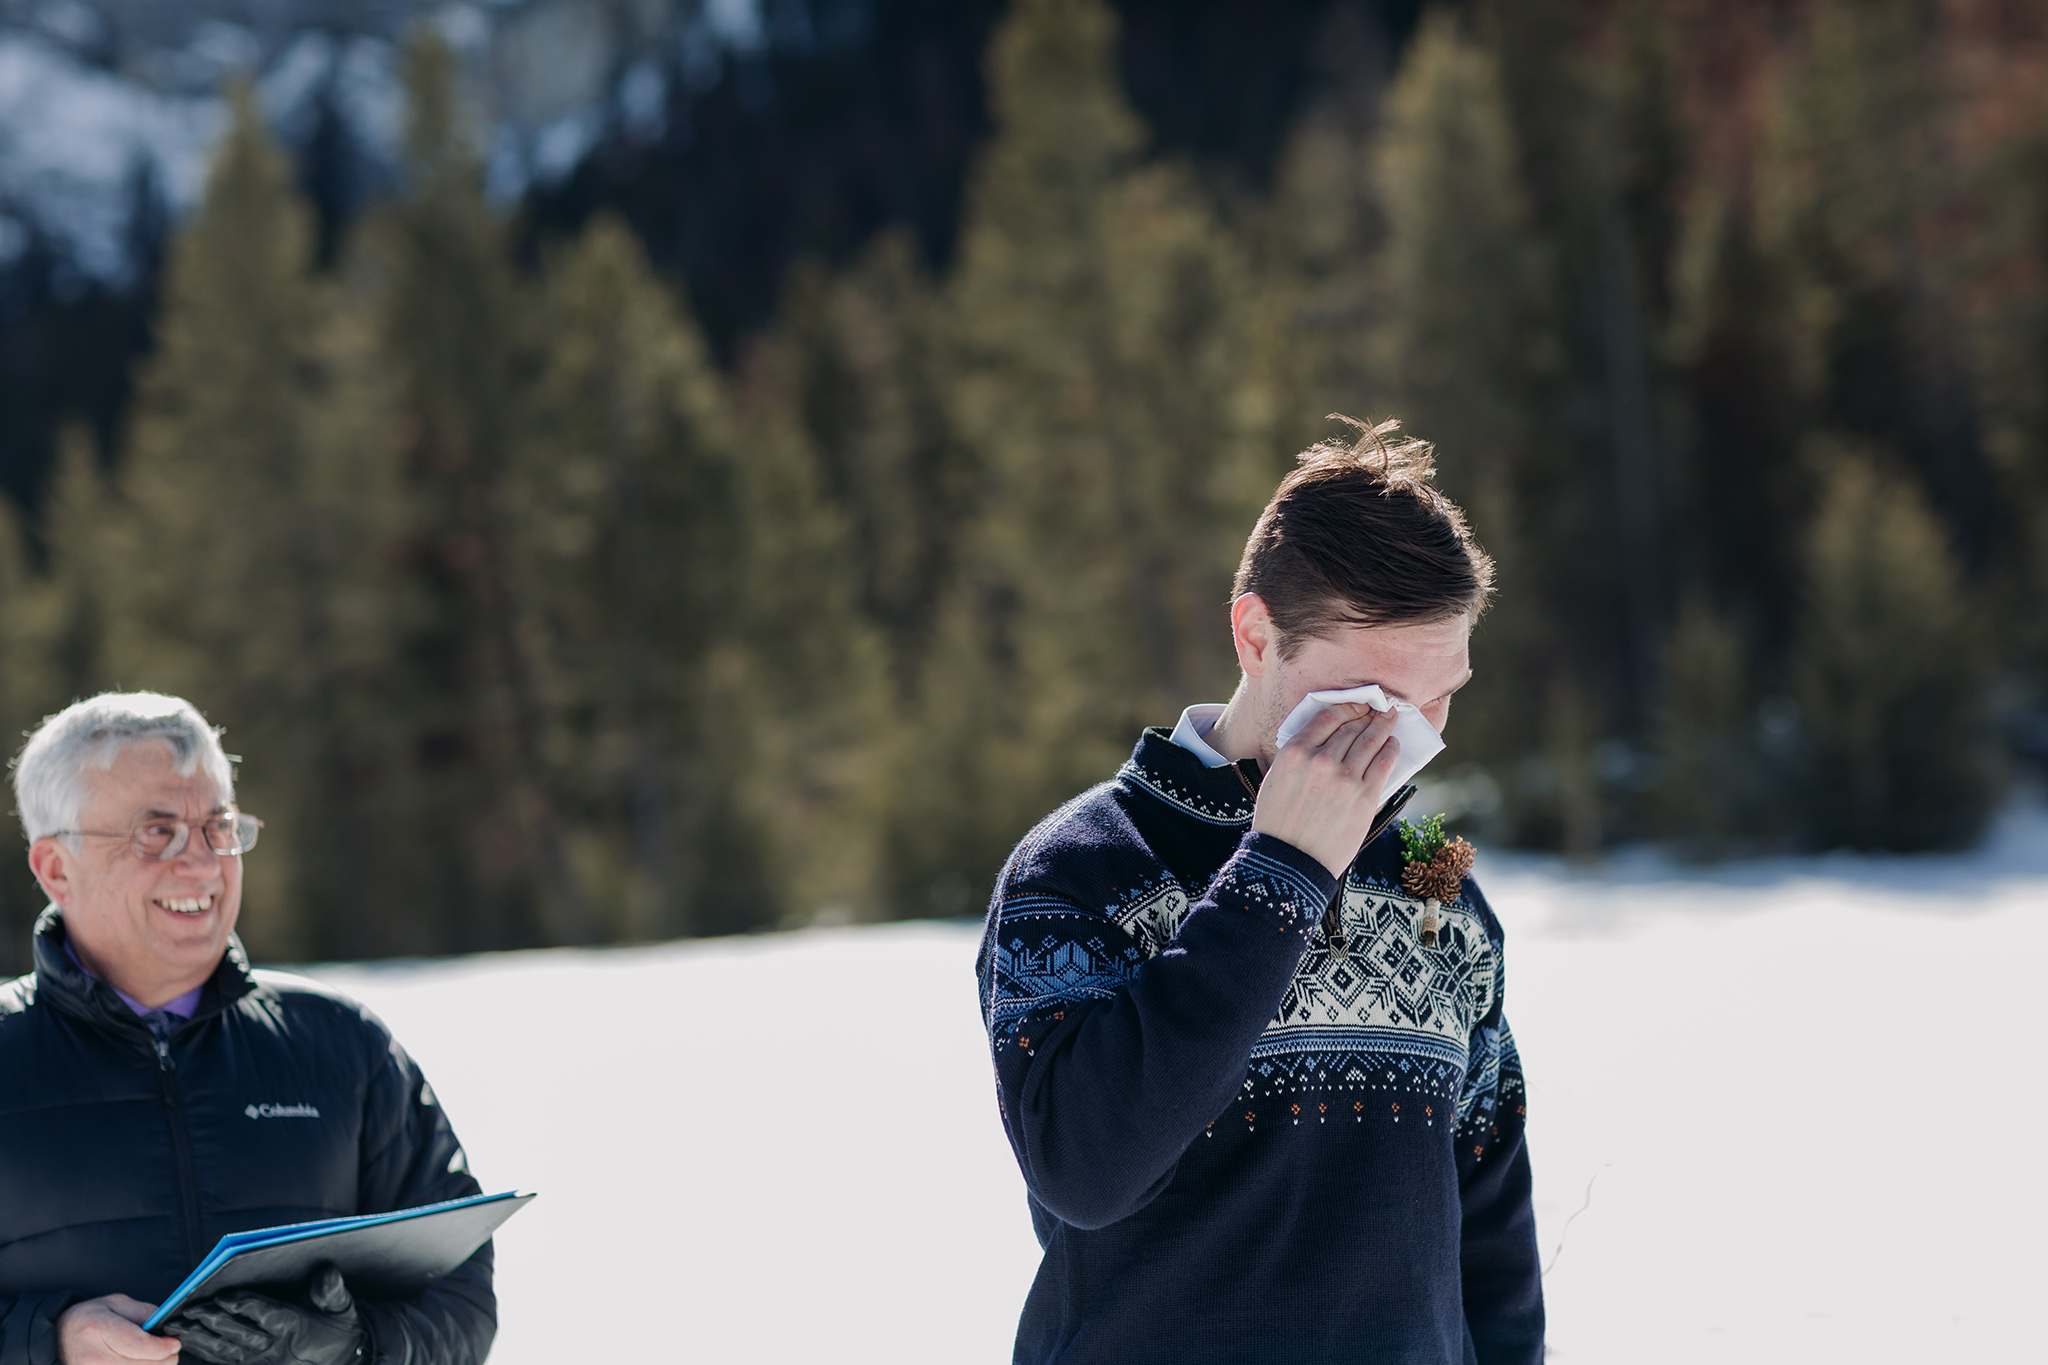 Tunnel Mountain winter wedding ceremony in Banff National Park photographed by ENV Photography